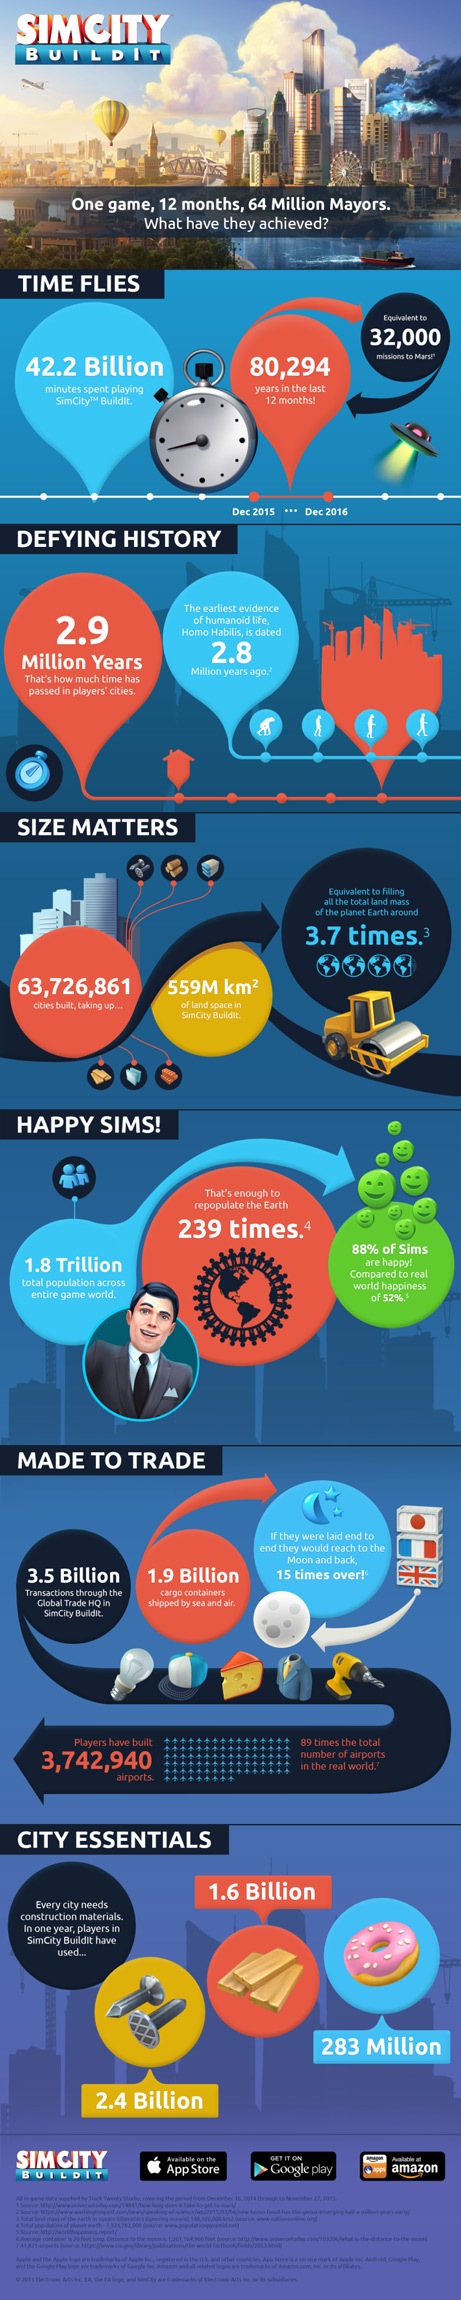 SimCity BuildIt infographic